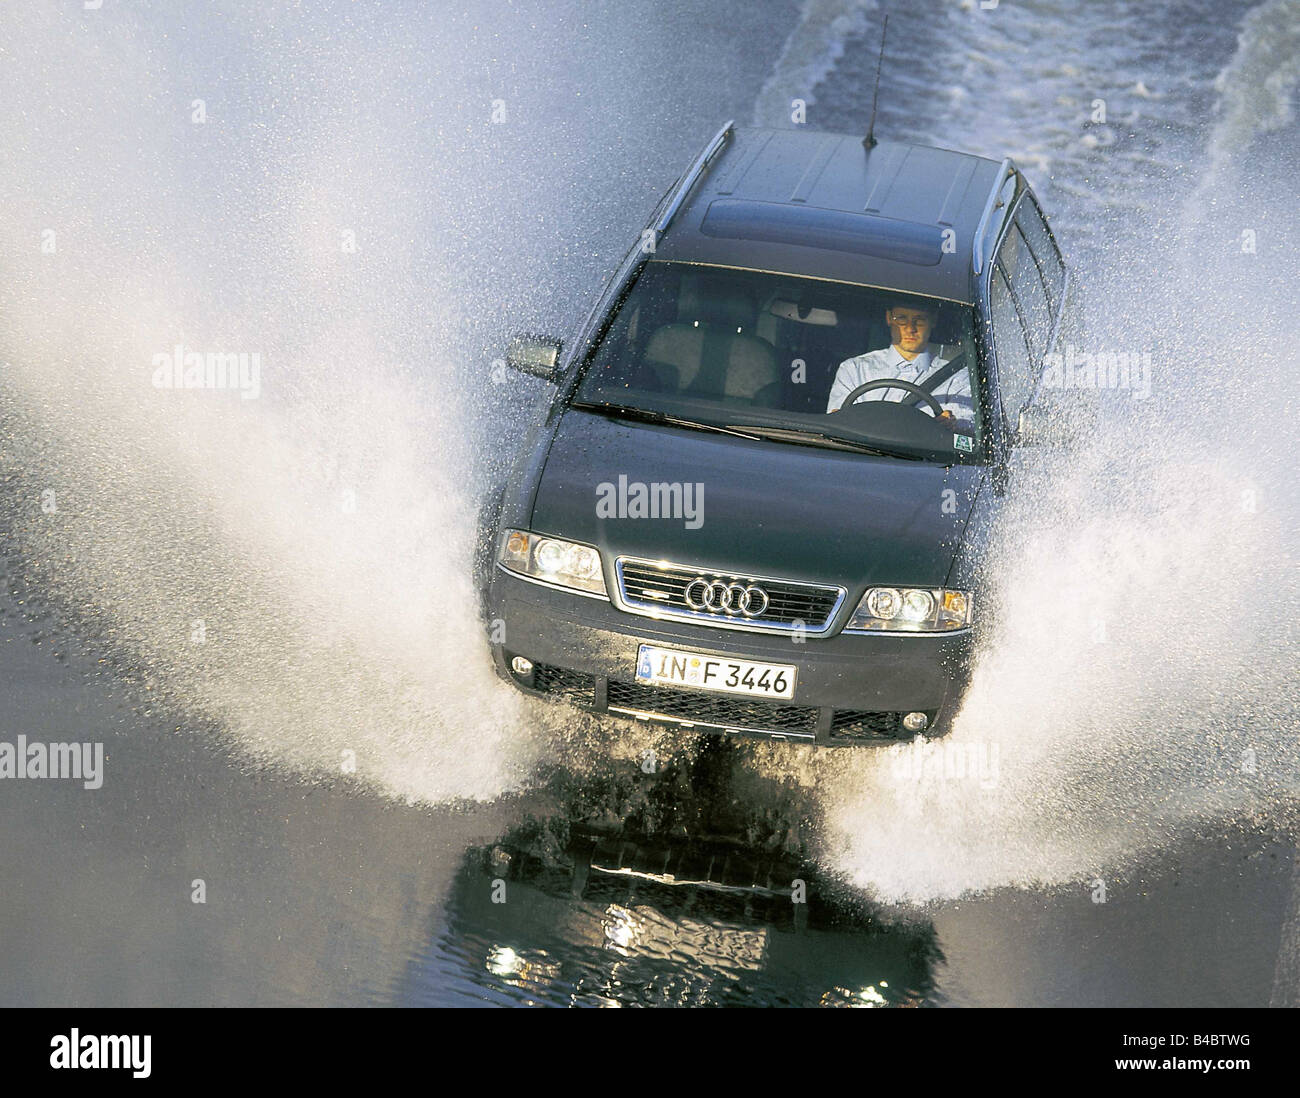 Car, Audi allroad quattro, hatchback, Avant, model year 2000-, green, diagonal from the front, Water, wet highway, Aquaplaning, Stock Photo